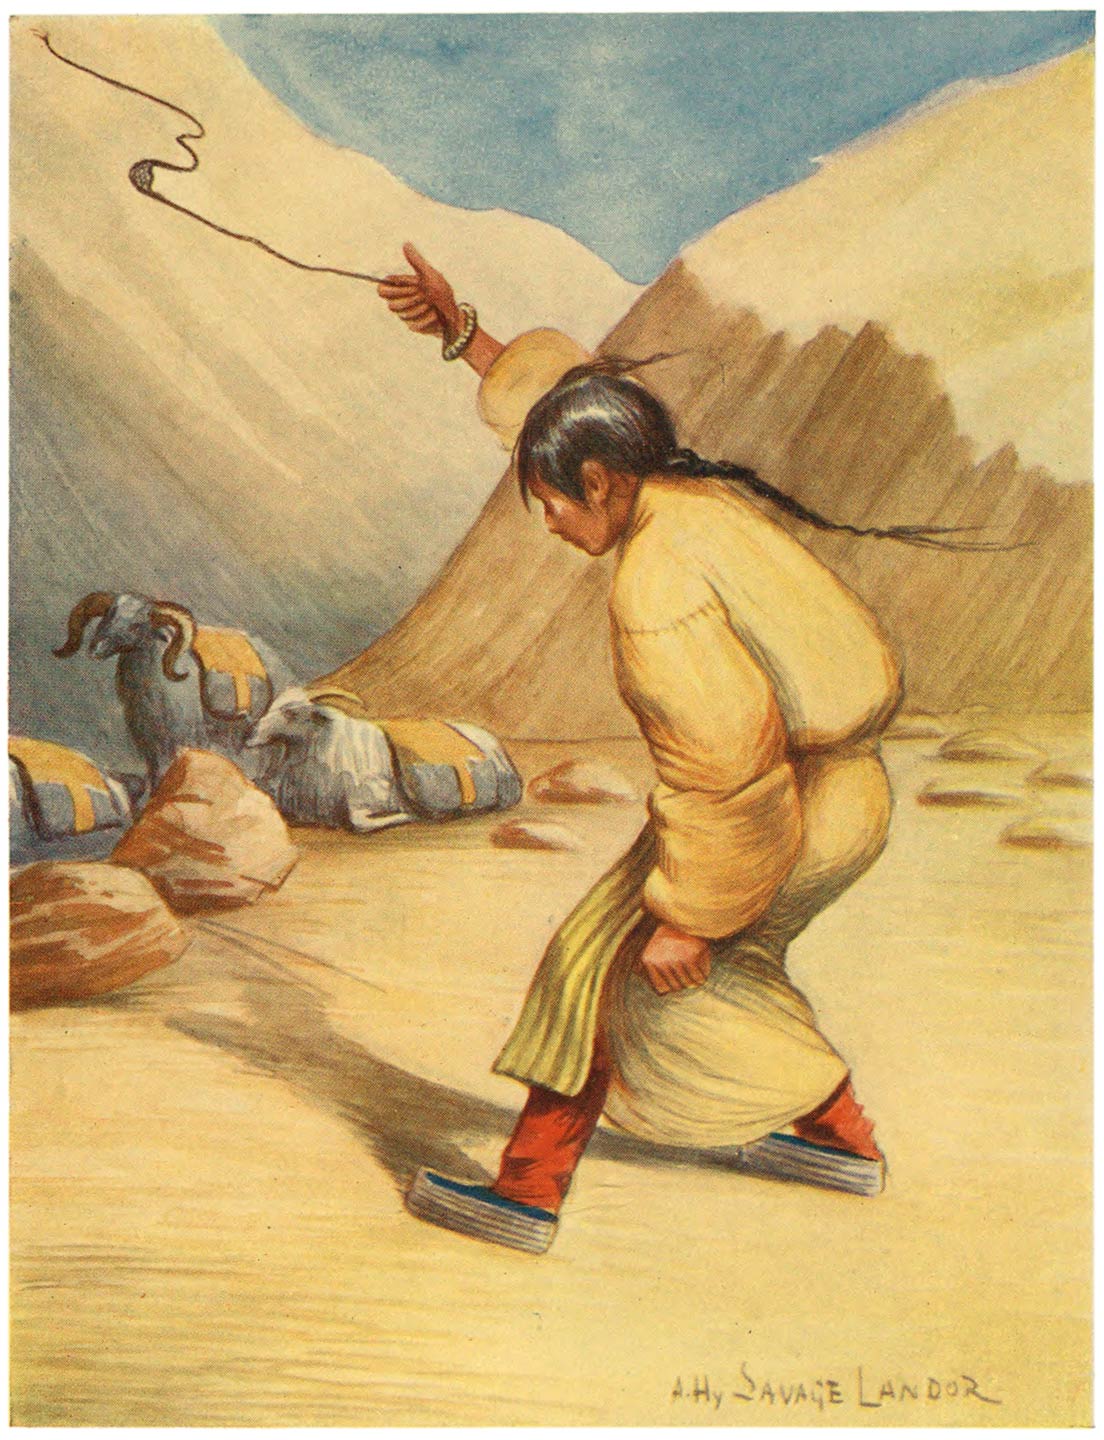 Tibetan Woman using a Sling for throwing Stones